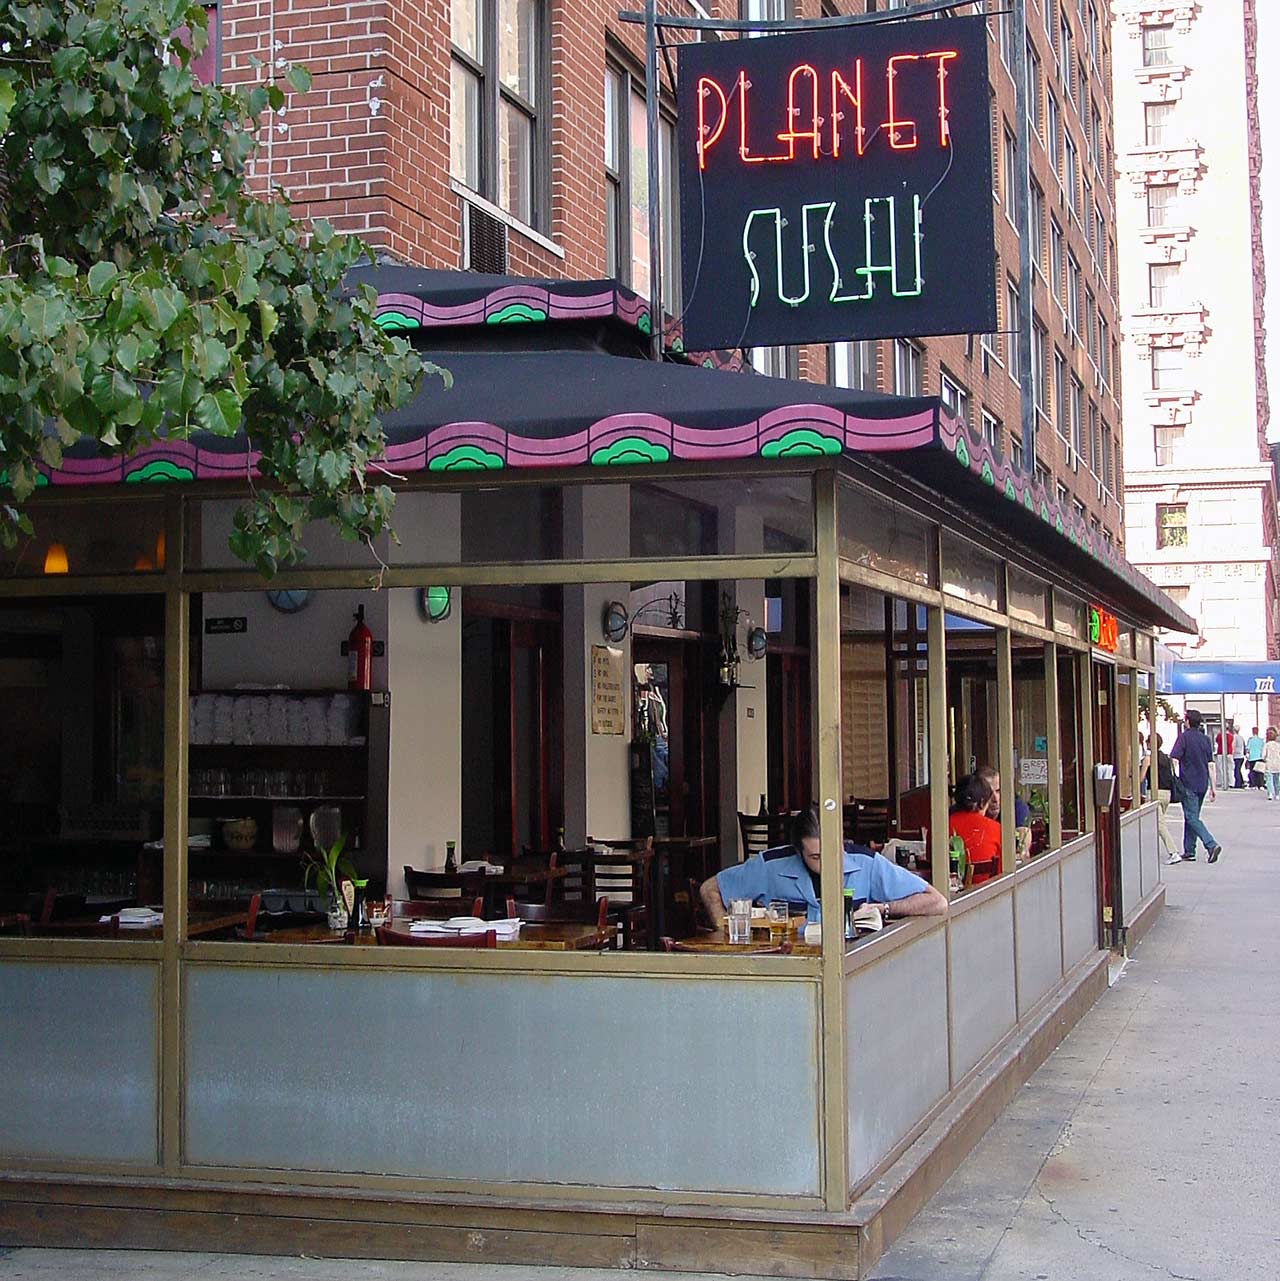 Exterior of Planet Sushi, looking down Amsterdam Avenue, with a neon sign and outdoor tables.